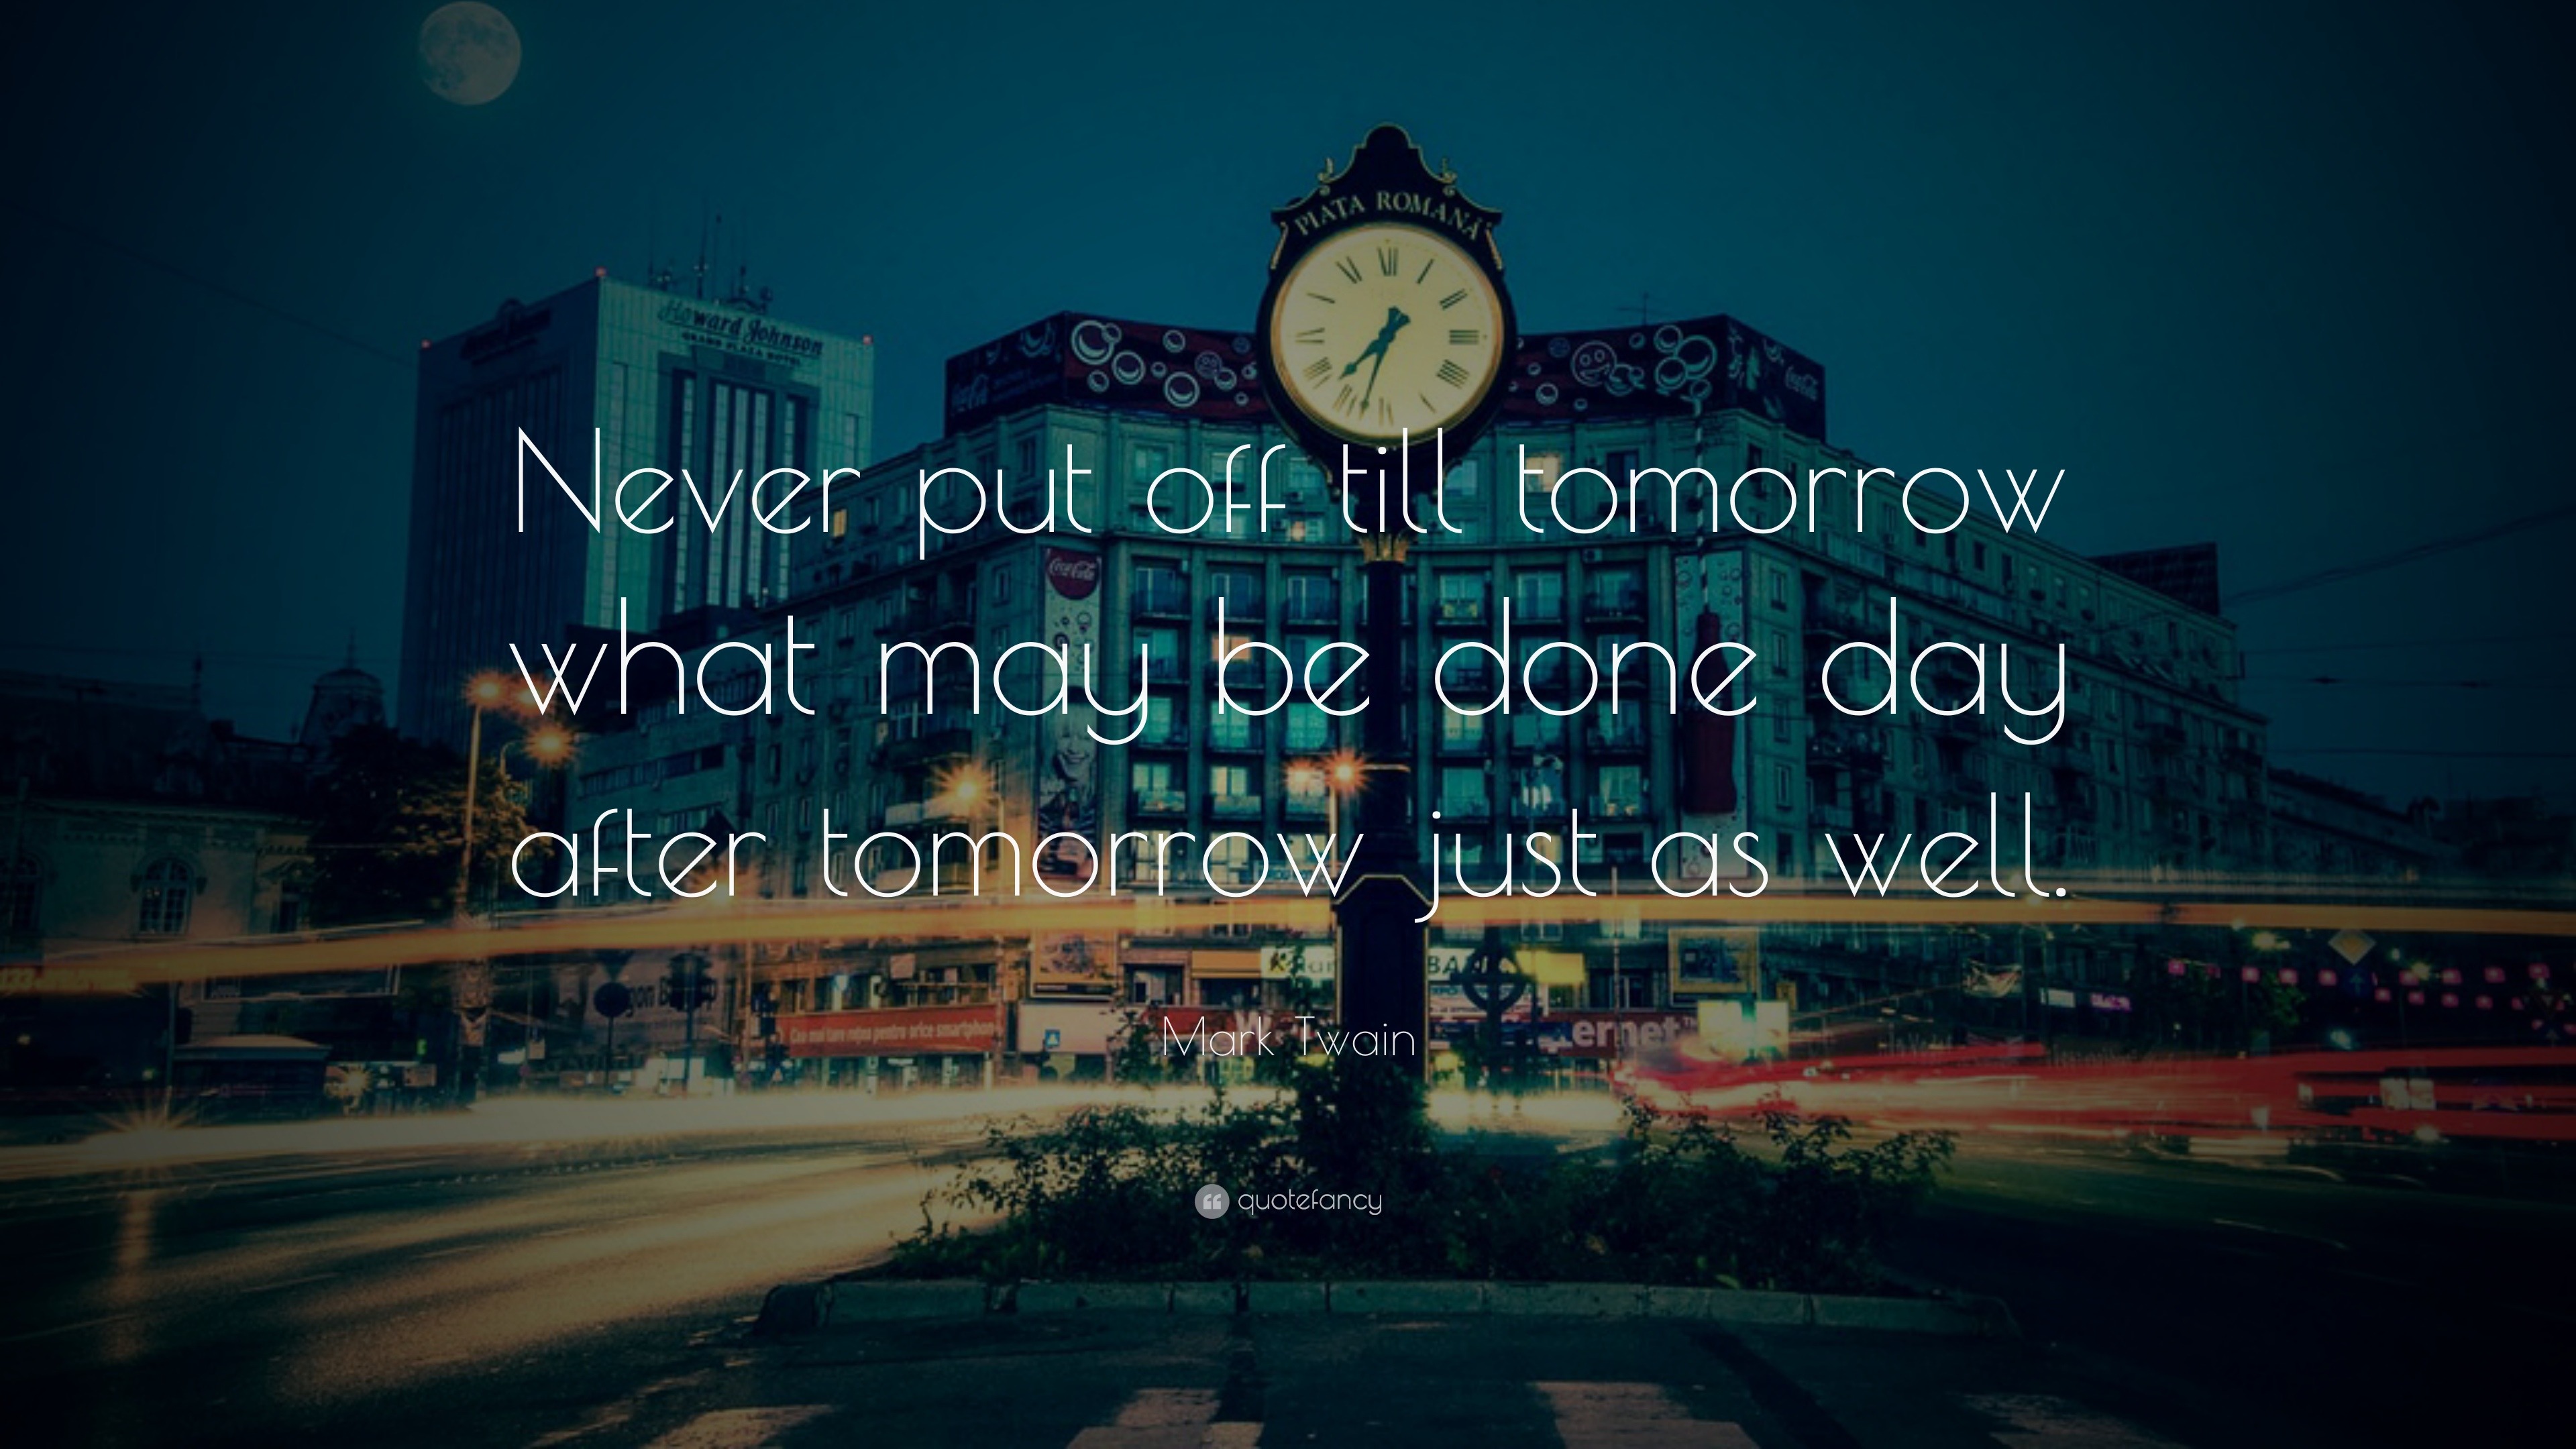 Mark Twain Quote: Never put off till tomorrow what may be done day